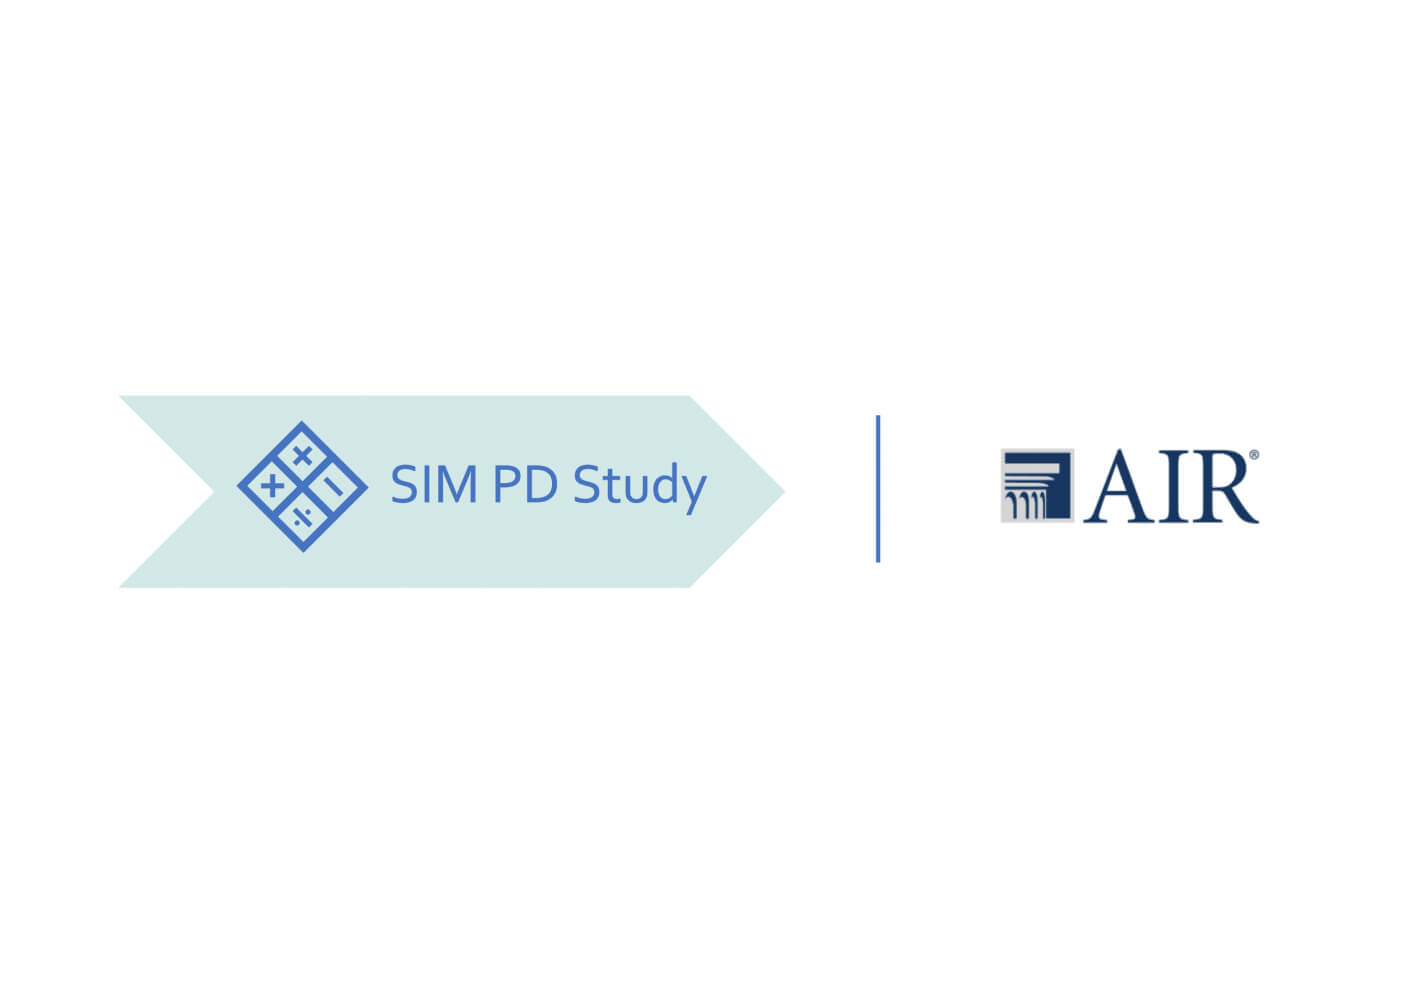 American Institutes For Research Experts Share Findings From Pilot Of New SIM PD Study Virtual